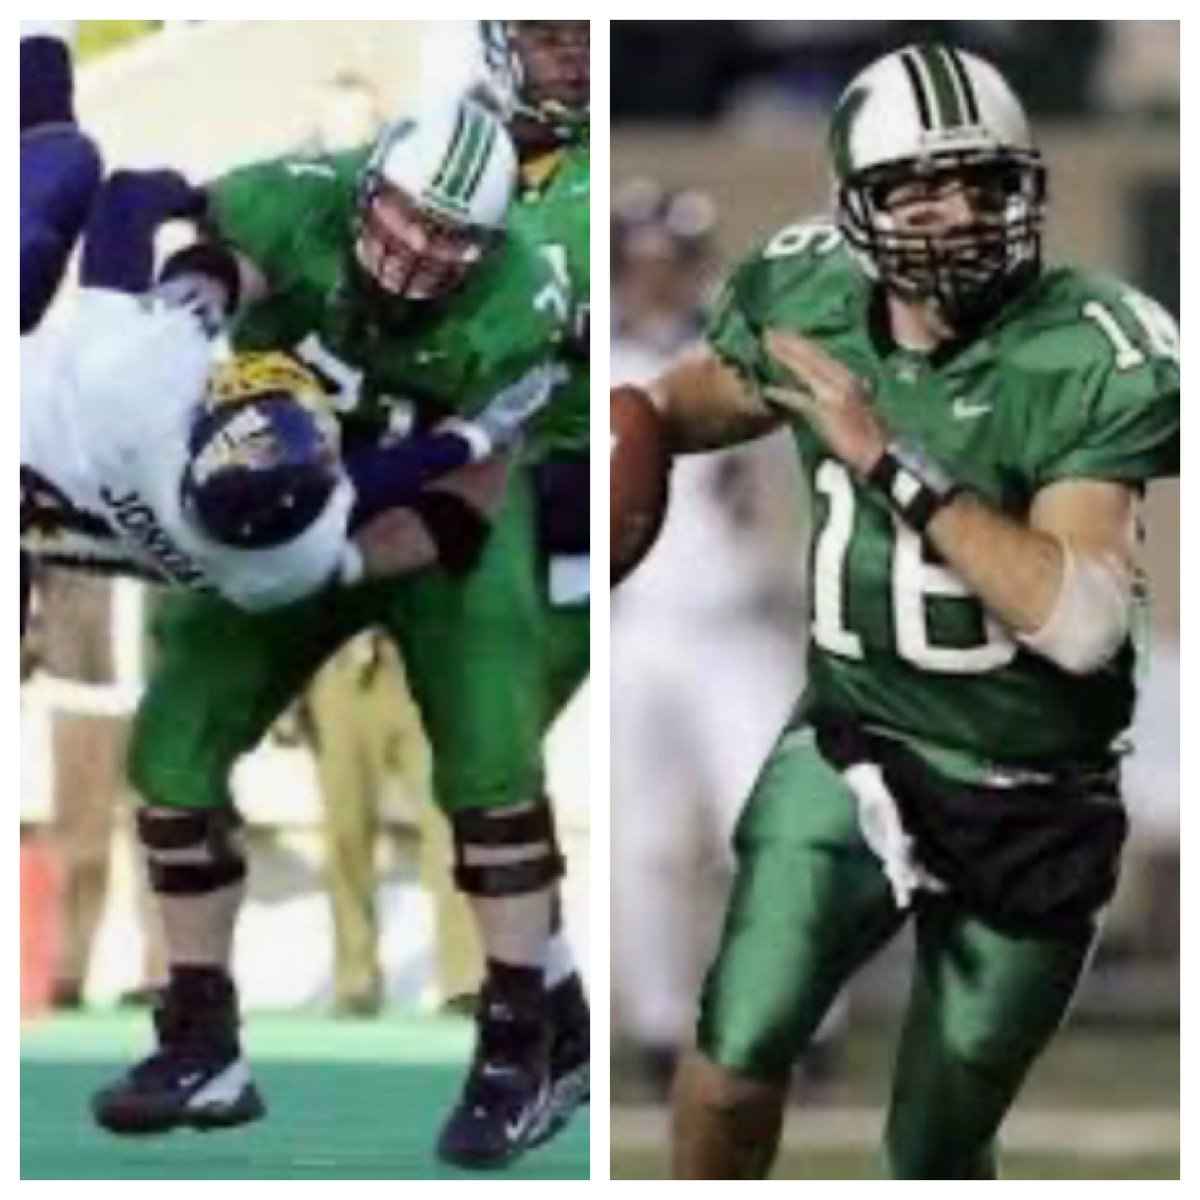 Good Luck to former @HerdFB greats @coachnatemcpeek Head Coach and @CoachSkinner16 Asst. Coach at @FDouglassFB as they are in the @KHSAA semifinals for the 6th straight year. I was blessed to have recruited both of these high quality young men. #HerdFamily #OneHerd